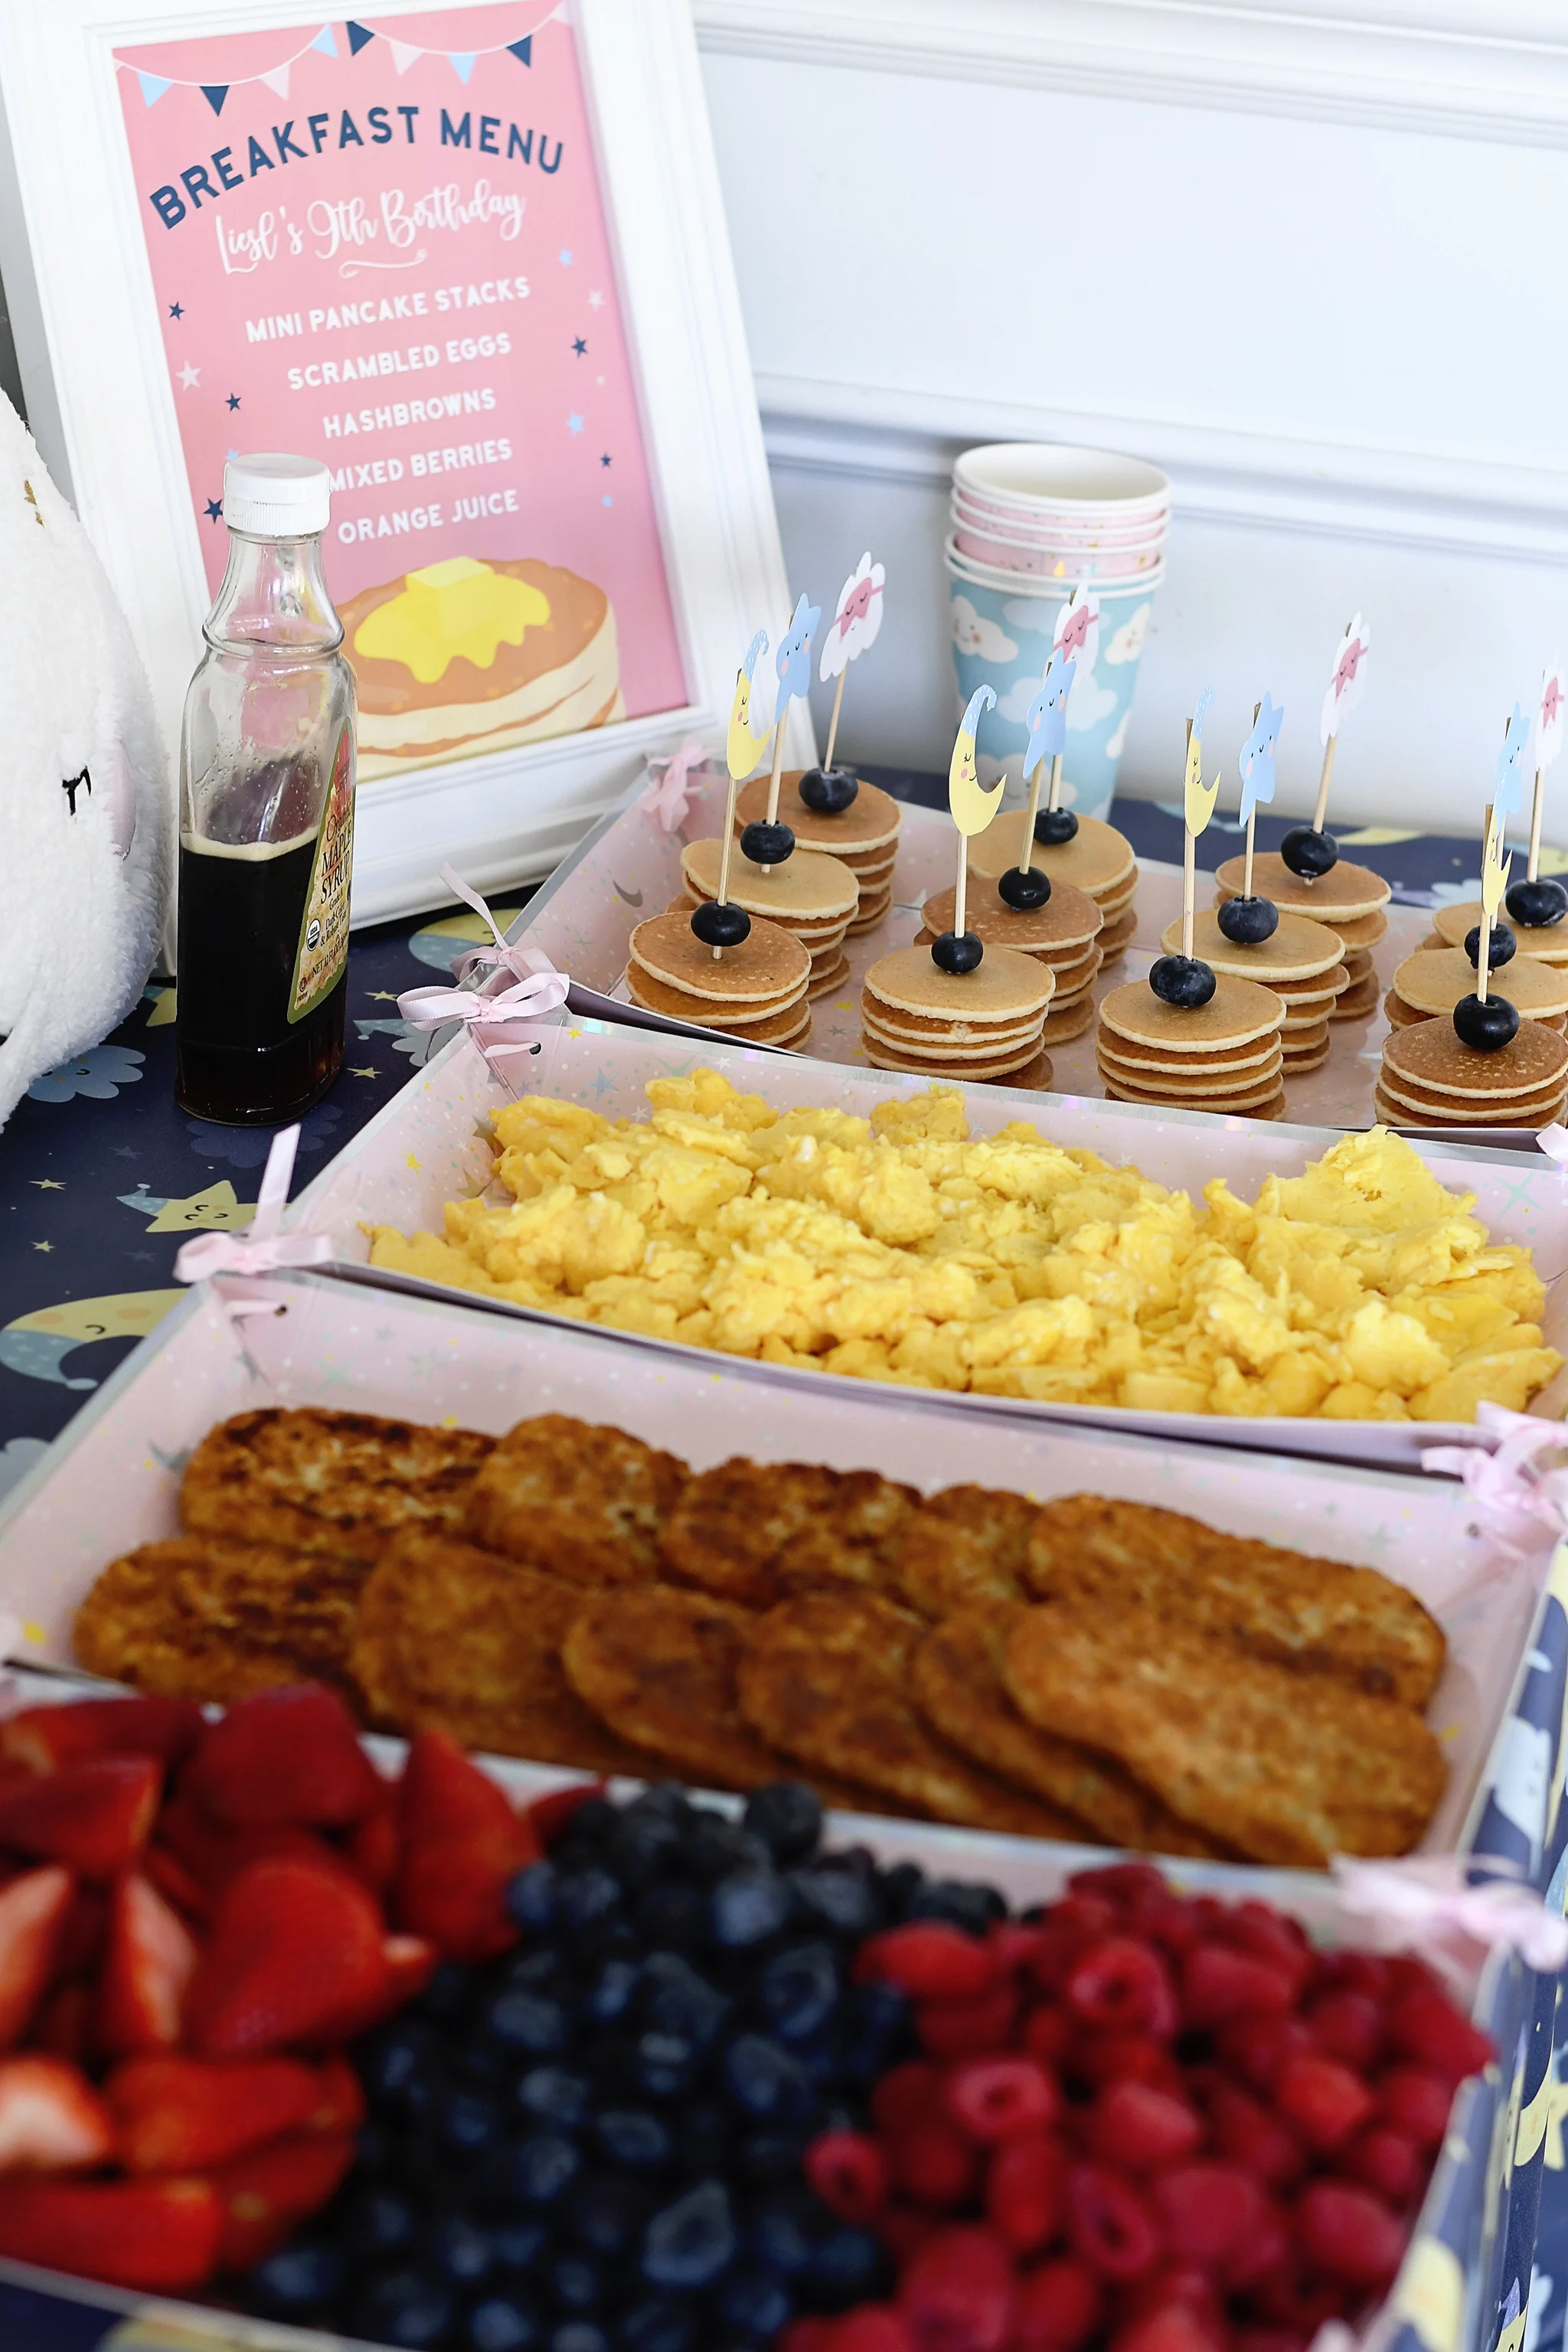 Pancakes in Pajamas - Offer a breakfast themed food bar!